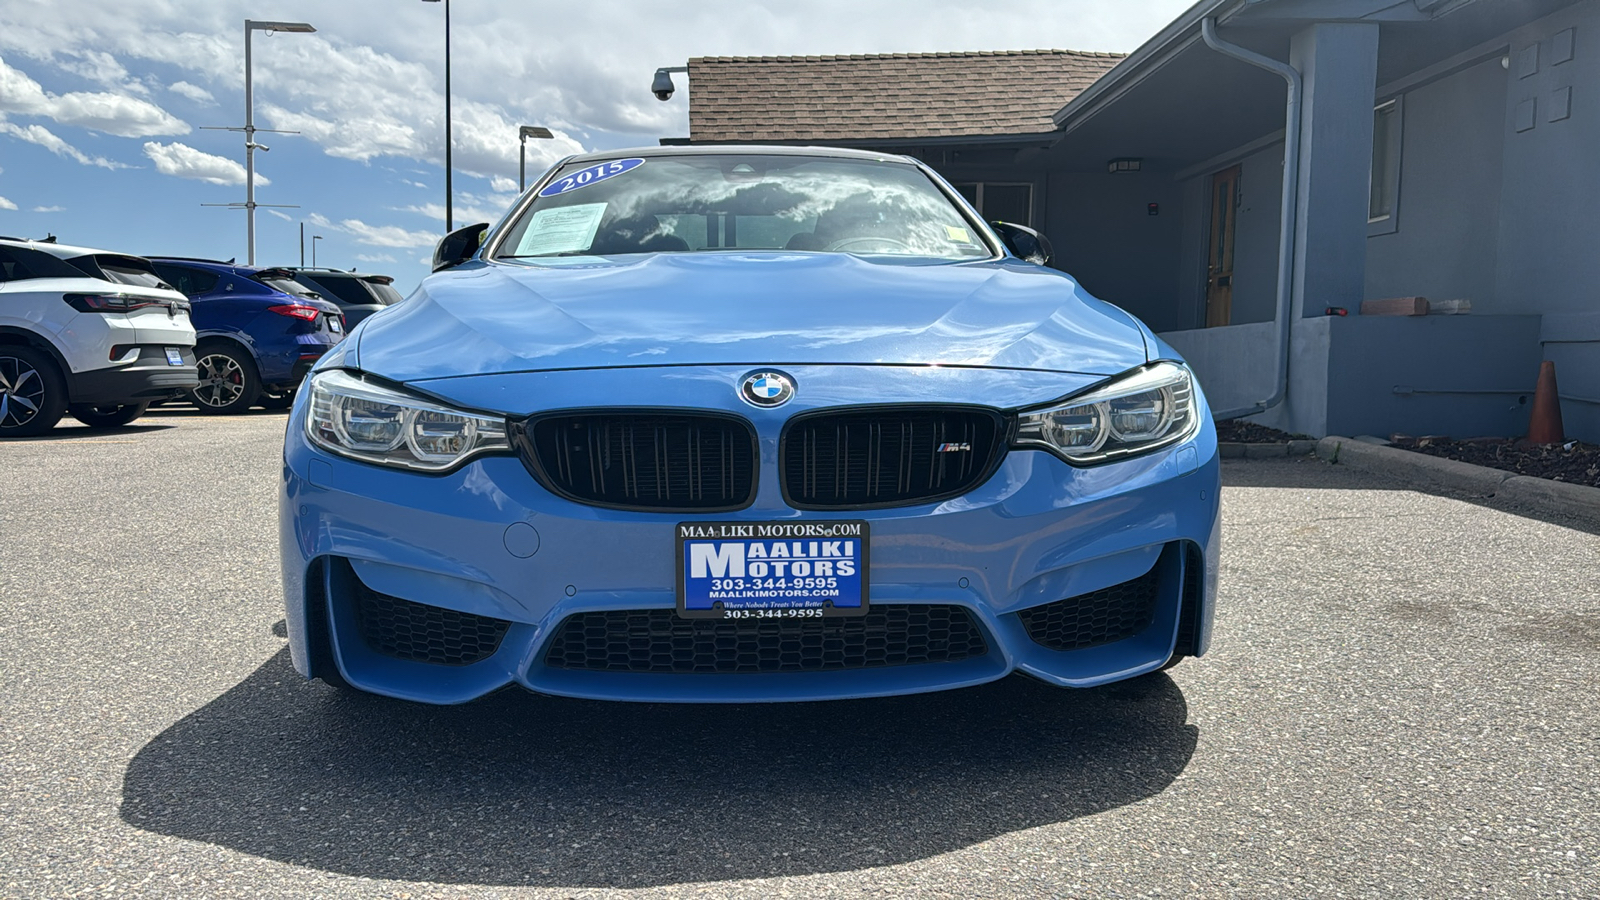 2015 BMW M4  Twin Turbo, Heated Seats, Leather, Navigation Sys 2